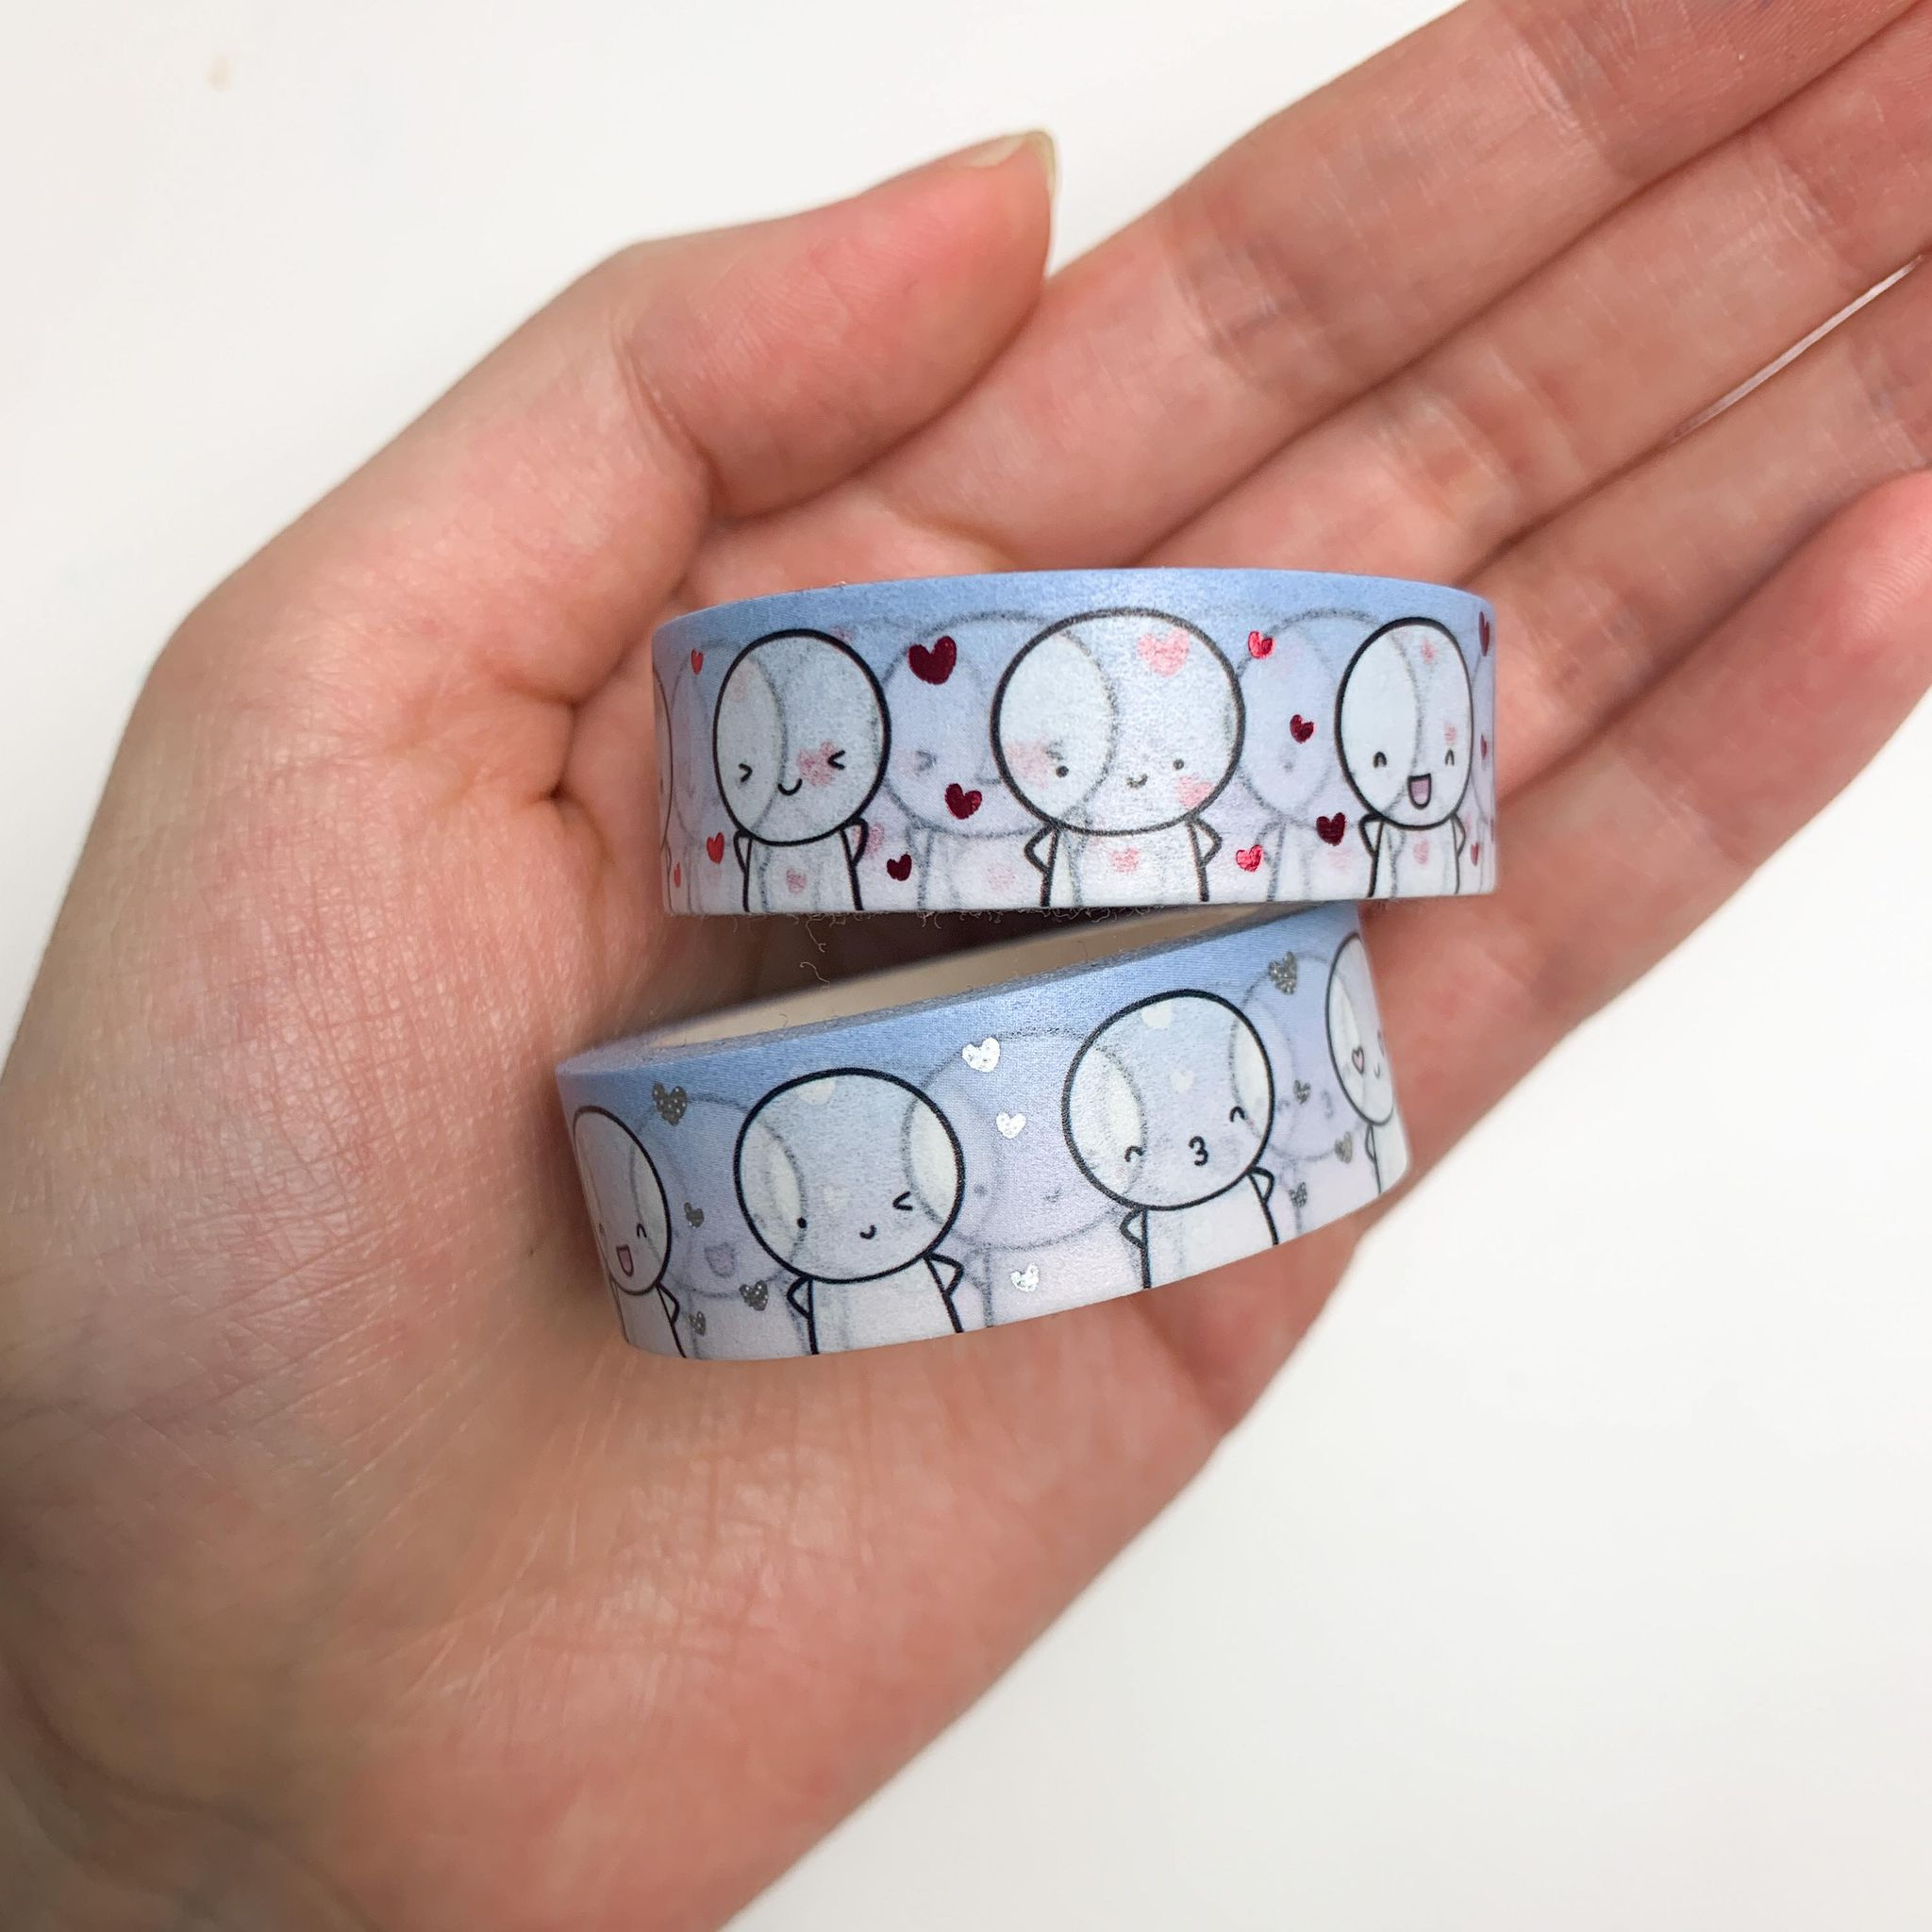 TheCoffeeMonsterzCo TCMC Cozy Christmas 15mm Washi Tape cute sold out emoti